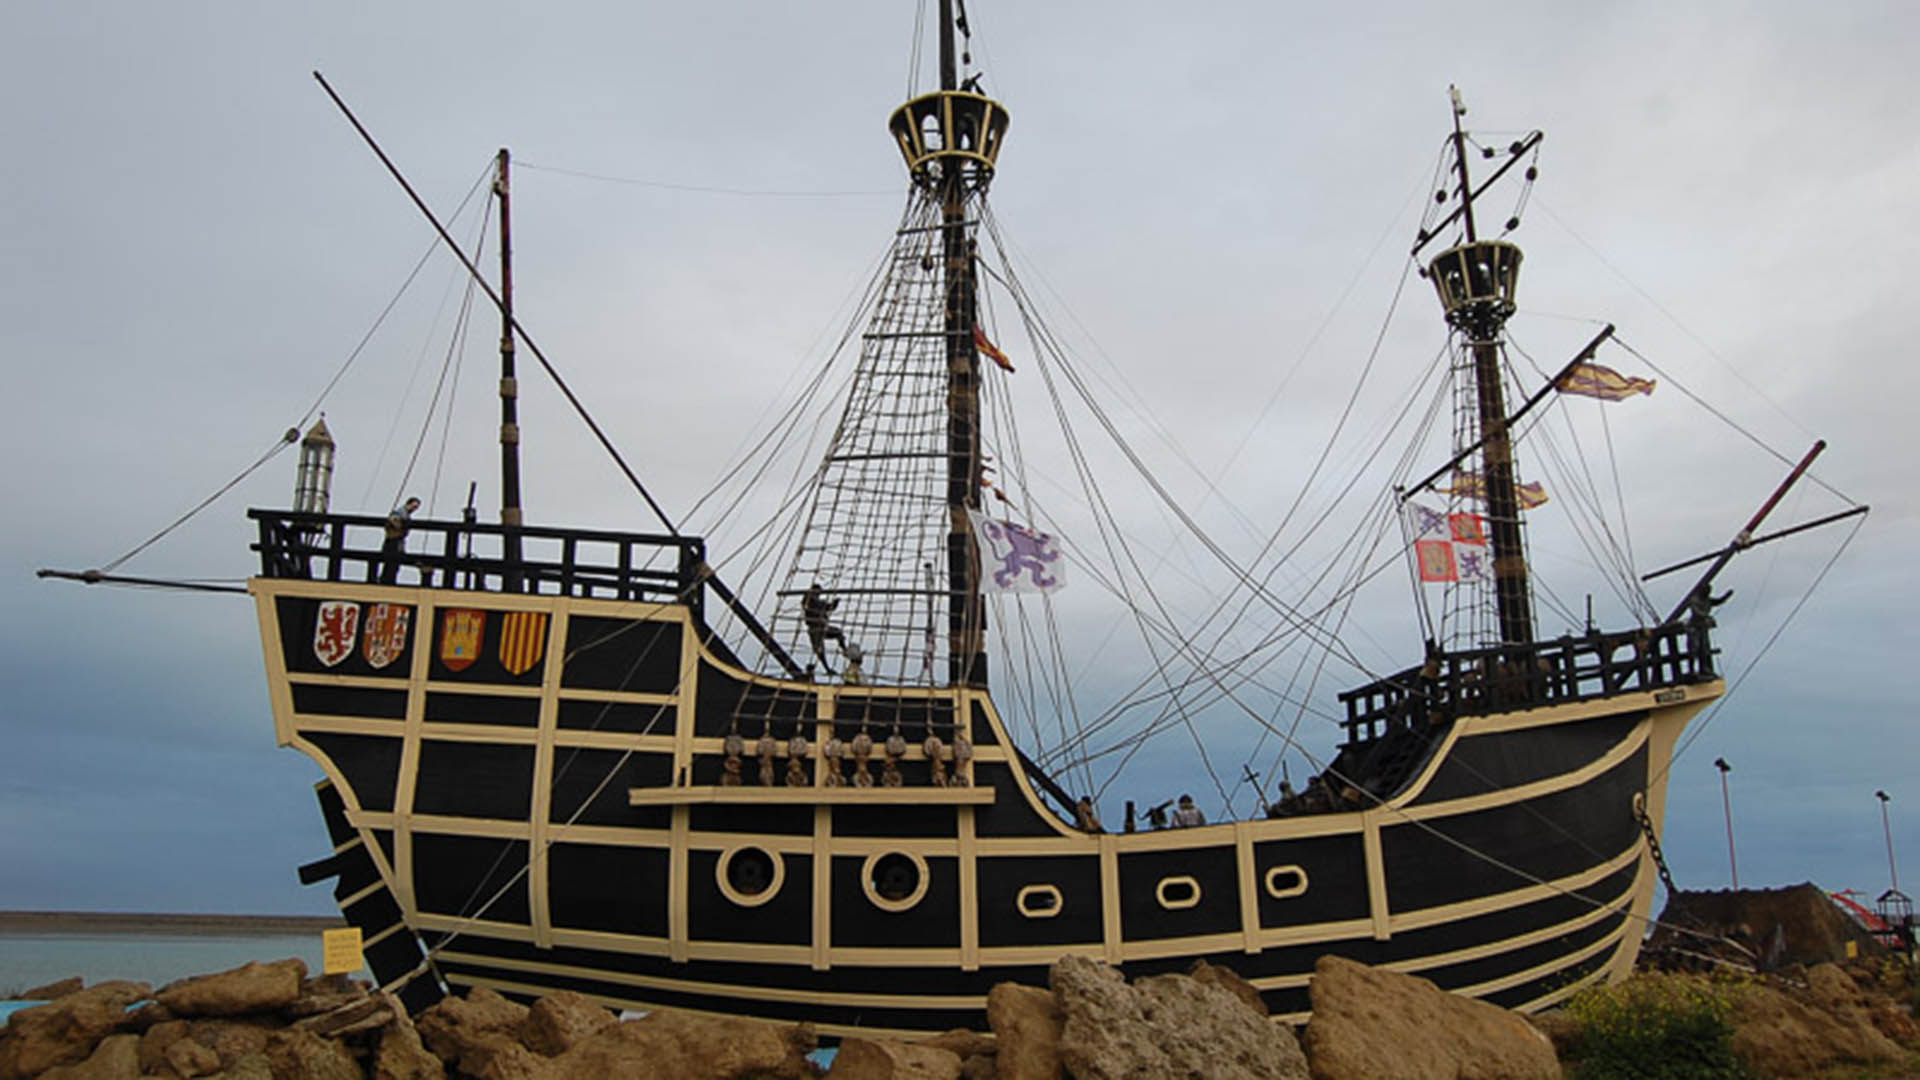 Replica Of Now Victoria, Which Completed A Long Journey Around The World